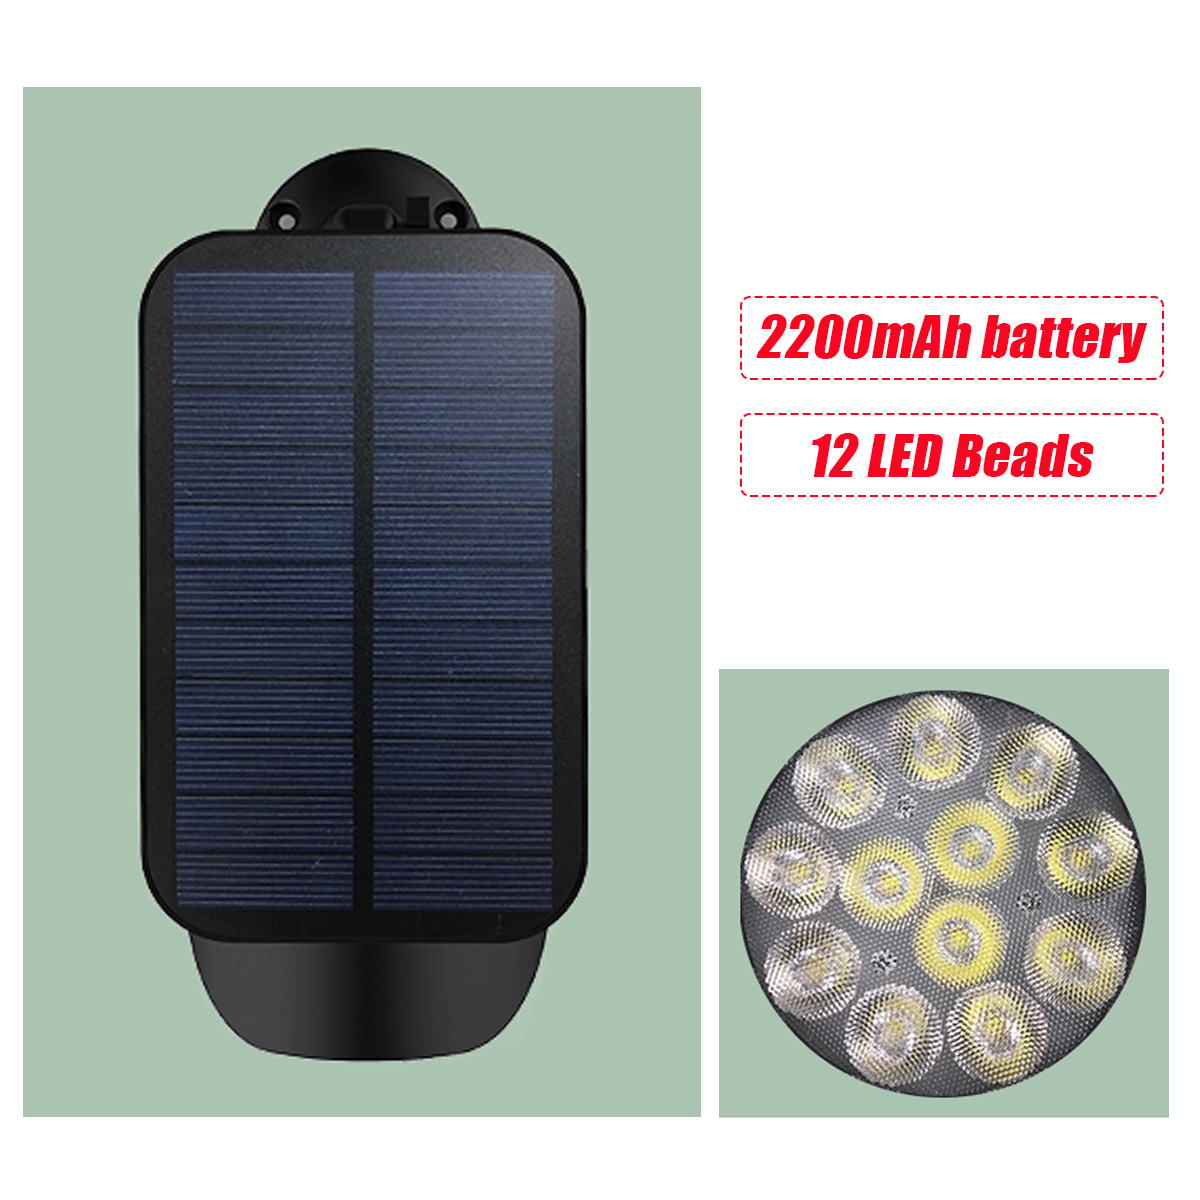 Waterproof-LED-Solar-Lawn-Light-ColorfulWarm-WhiteWhite-Outdoor-Wall-Ground-Garden-Pathway-Security--1724544-2